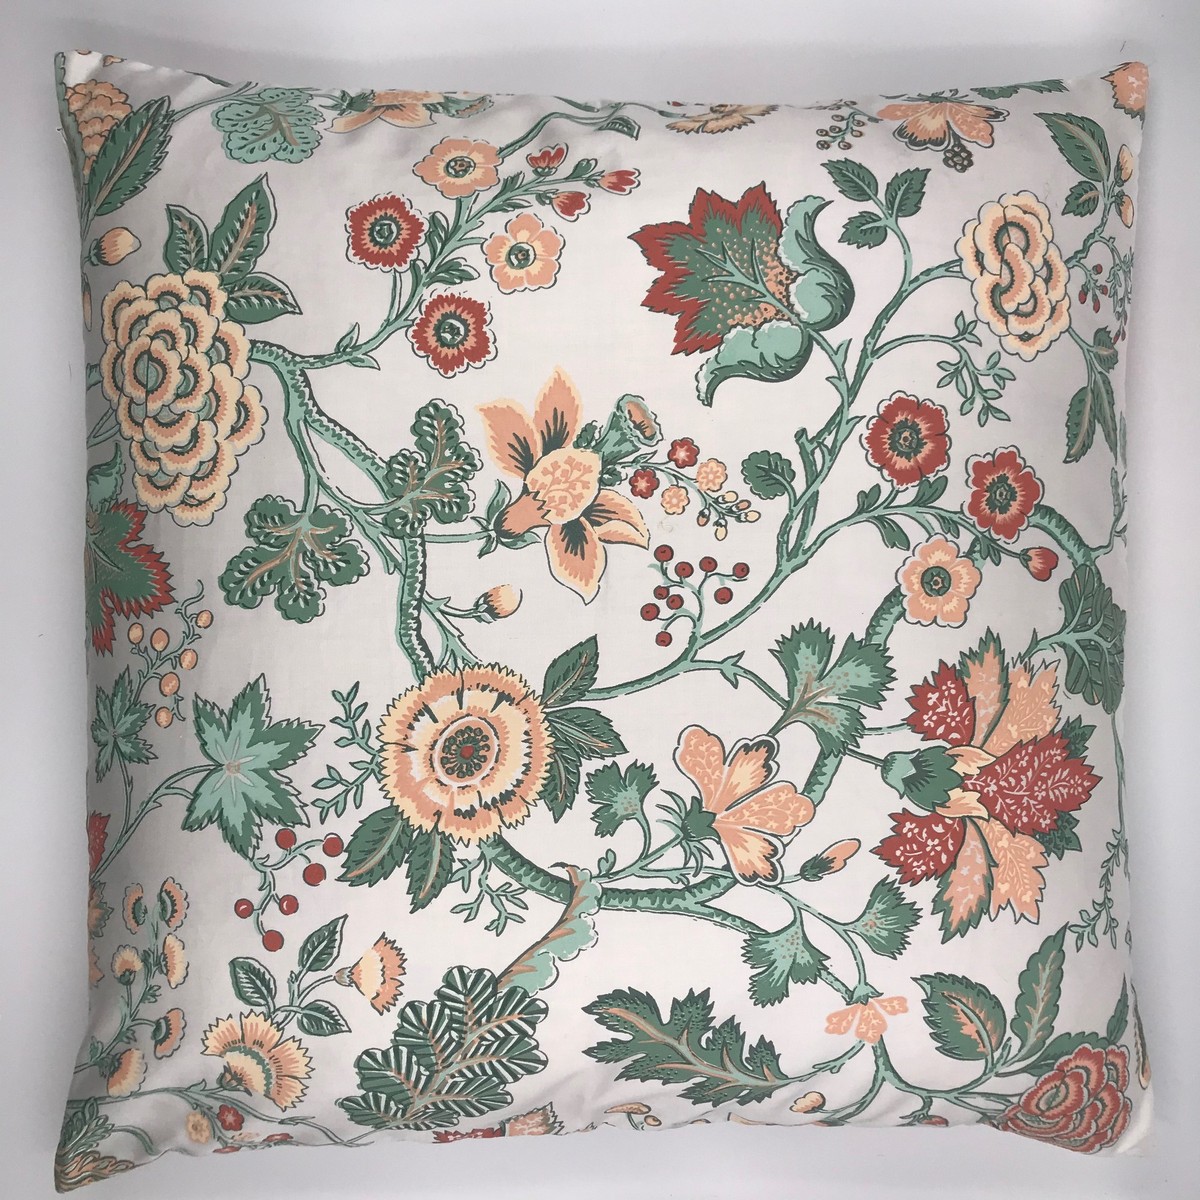 Buy Handmade square cotton floral print vintage retro style pillow, Style 60s pillow, Сraftsman's pillow, Hand made decorative pillow